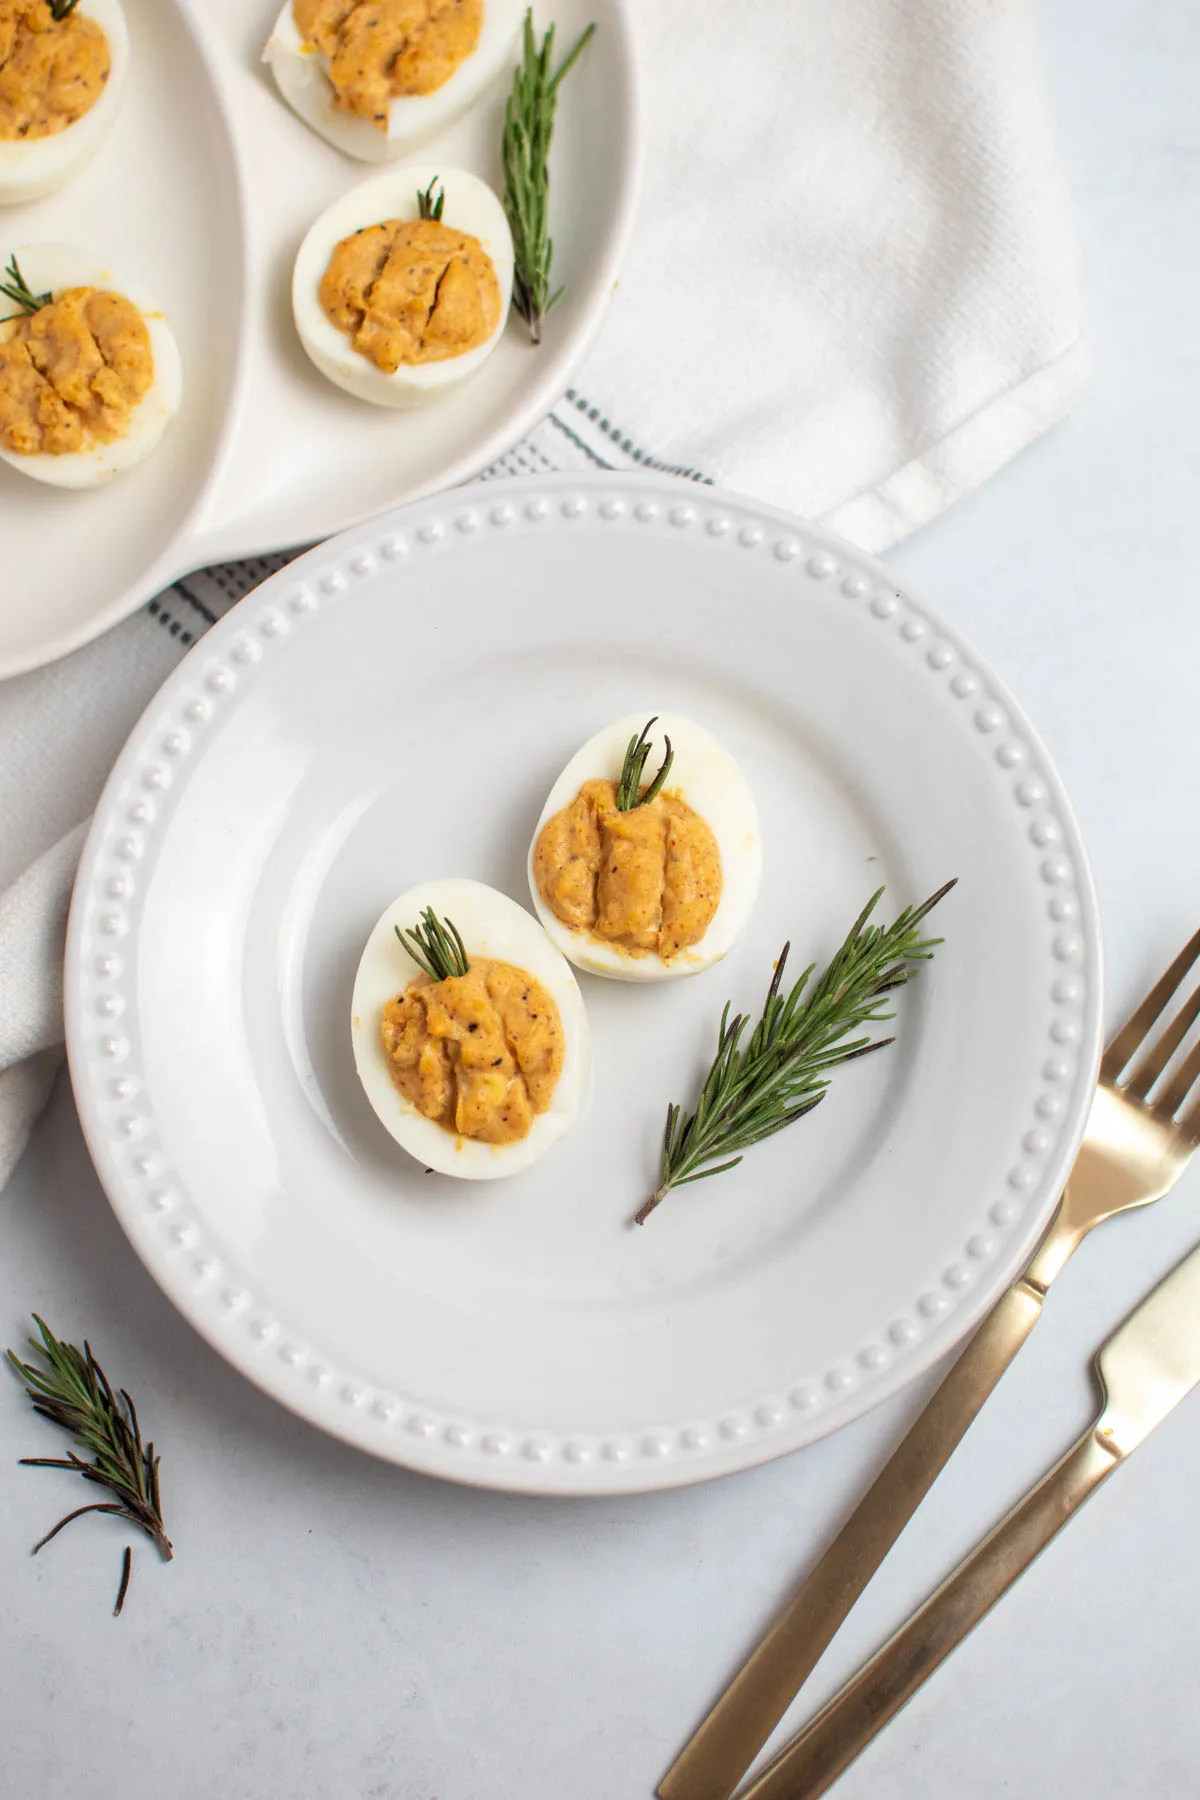 Two Thanksgiving deviled eggs on a white plate with sprig of fresh rosemary.